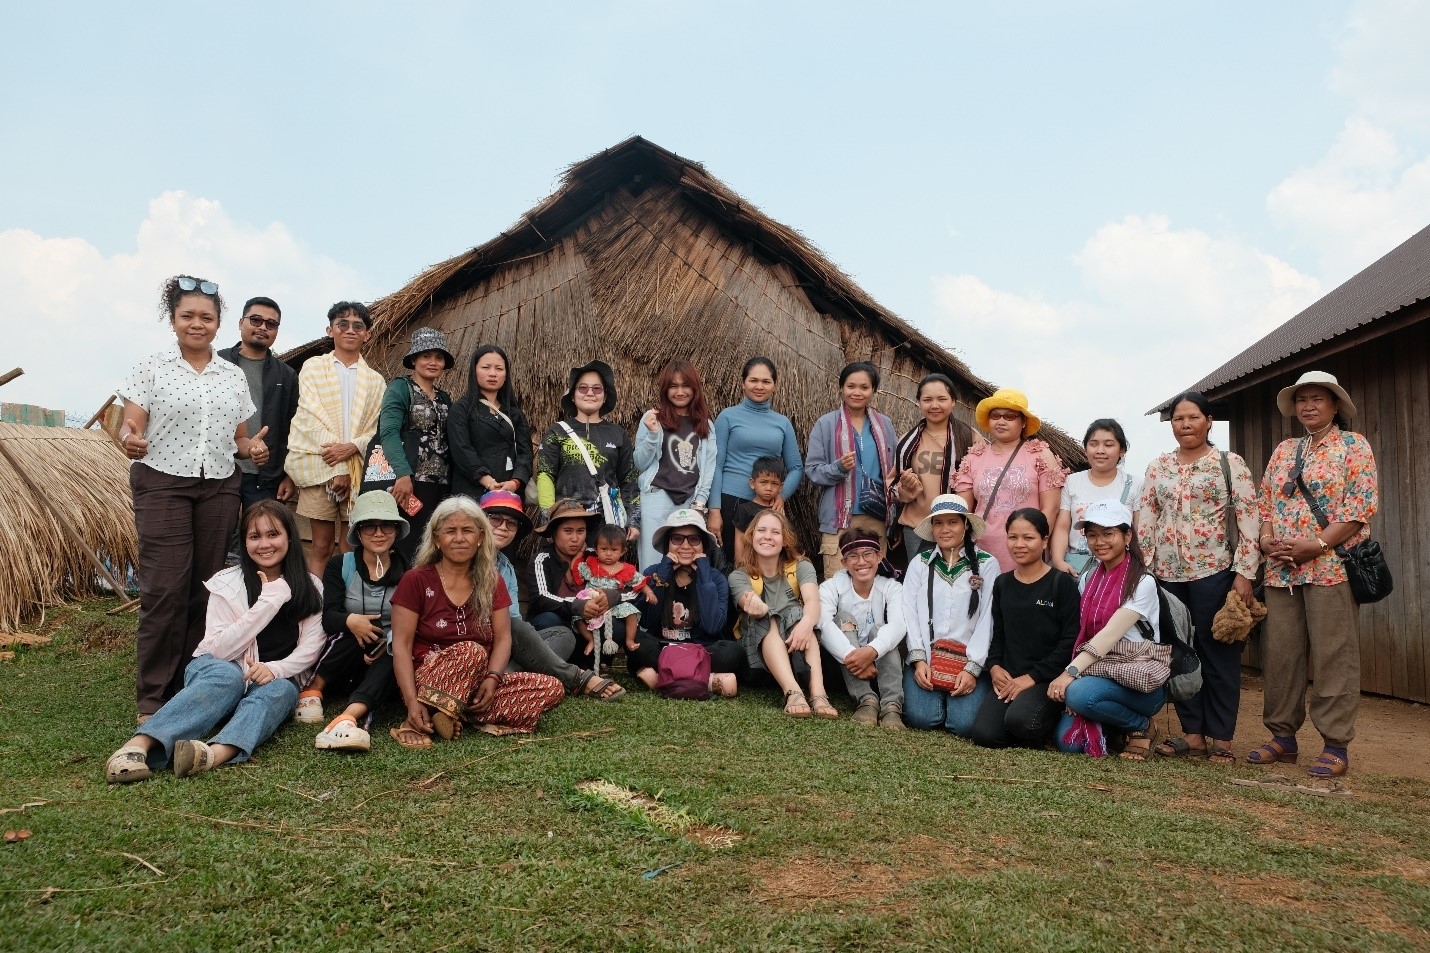 A group photo of the trip participants posing in front of a hut.